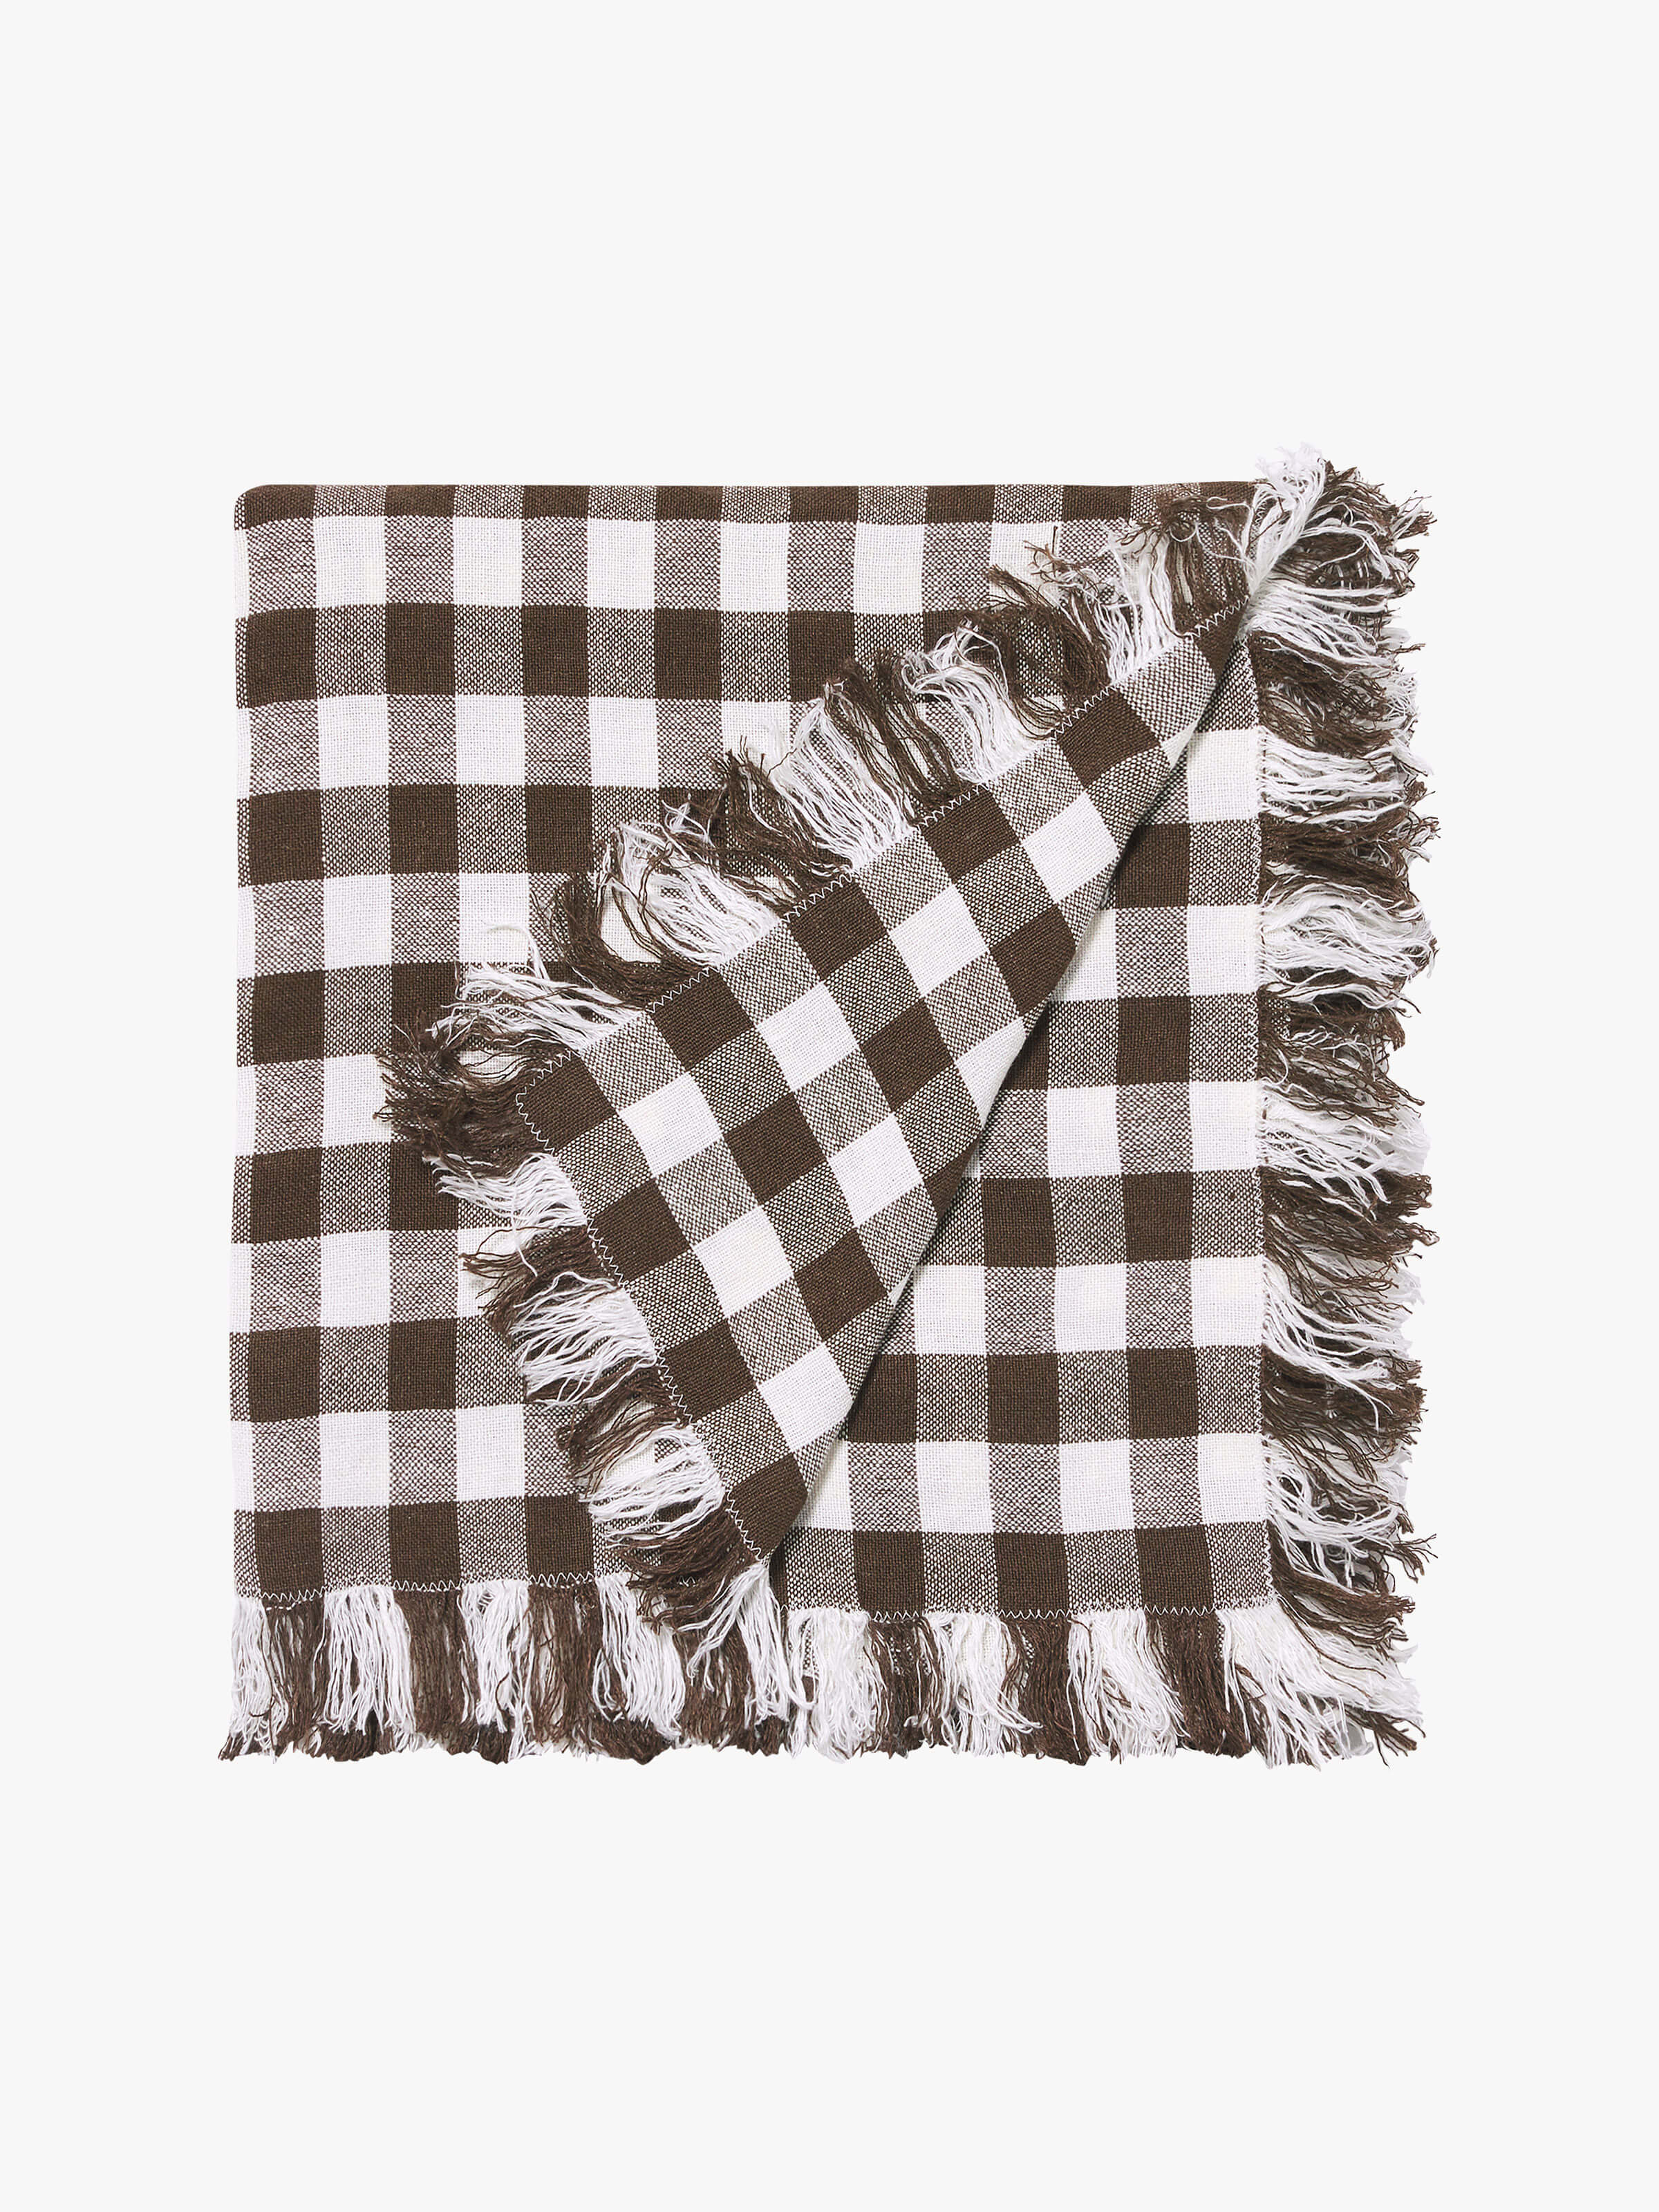 Buy Luxury Blankets & Throws Online - L&M Home – Page 2